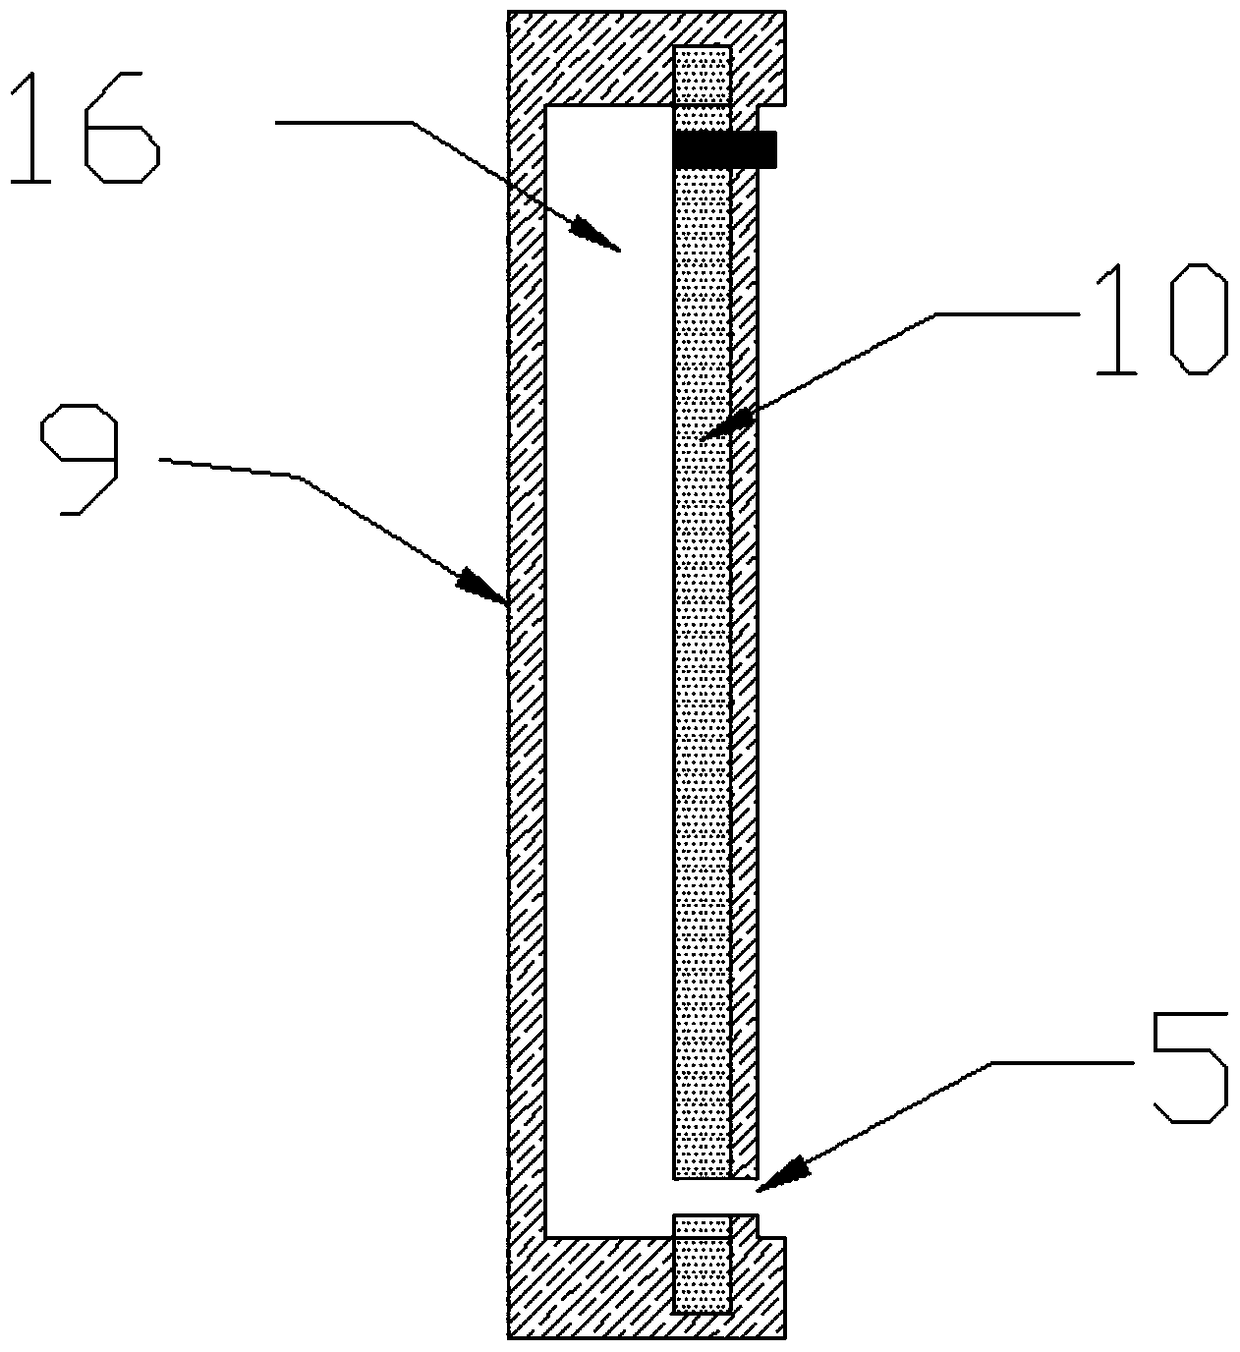 A method for preventing concrete temperature cracks in underground side wall structures